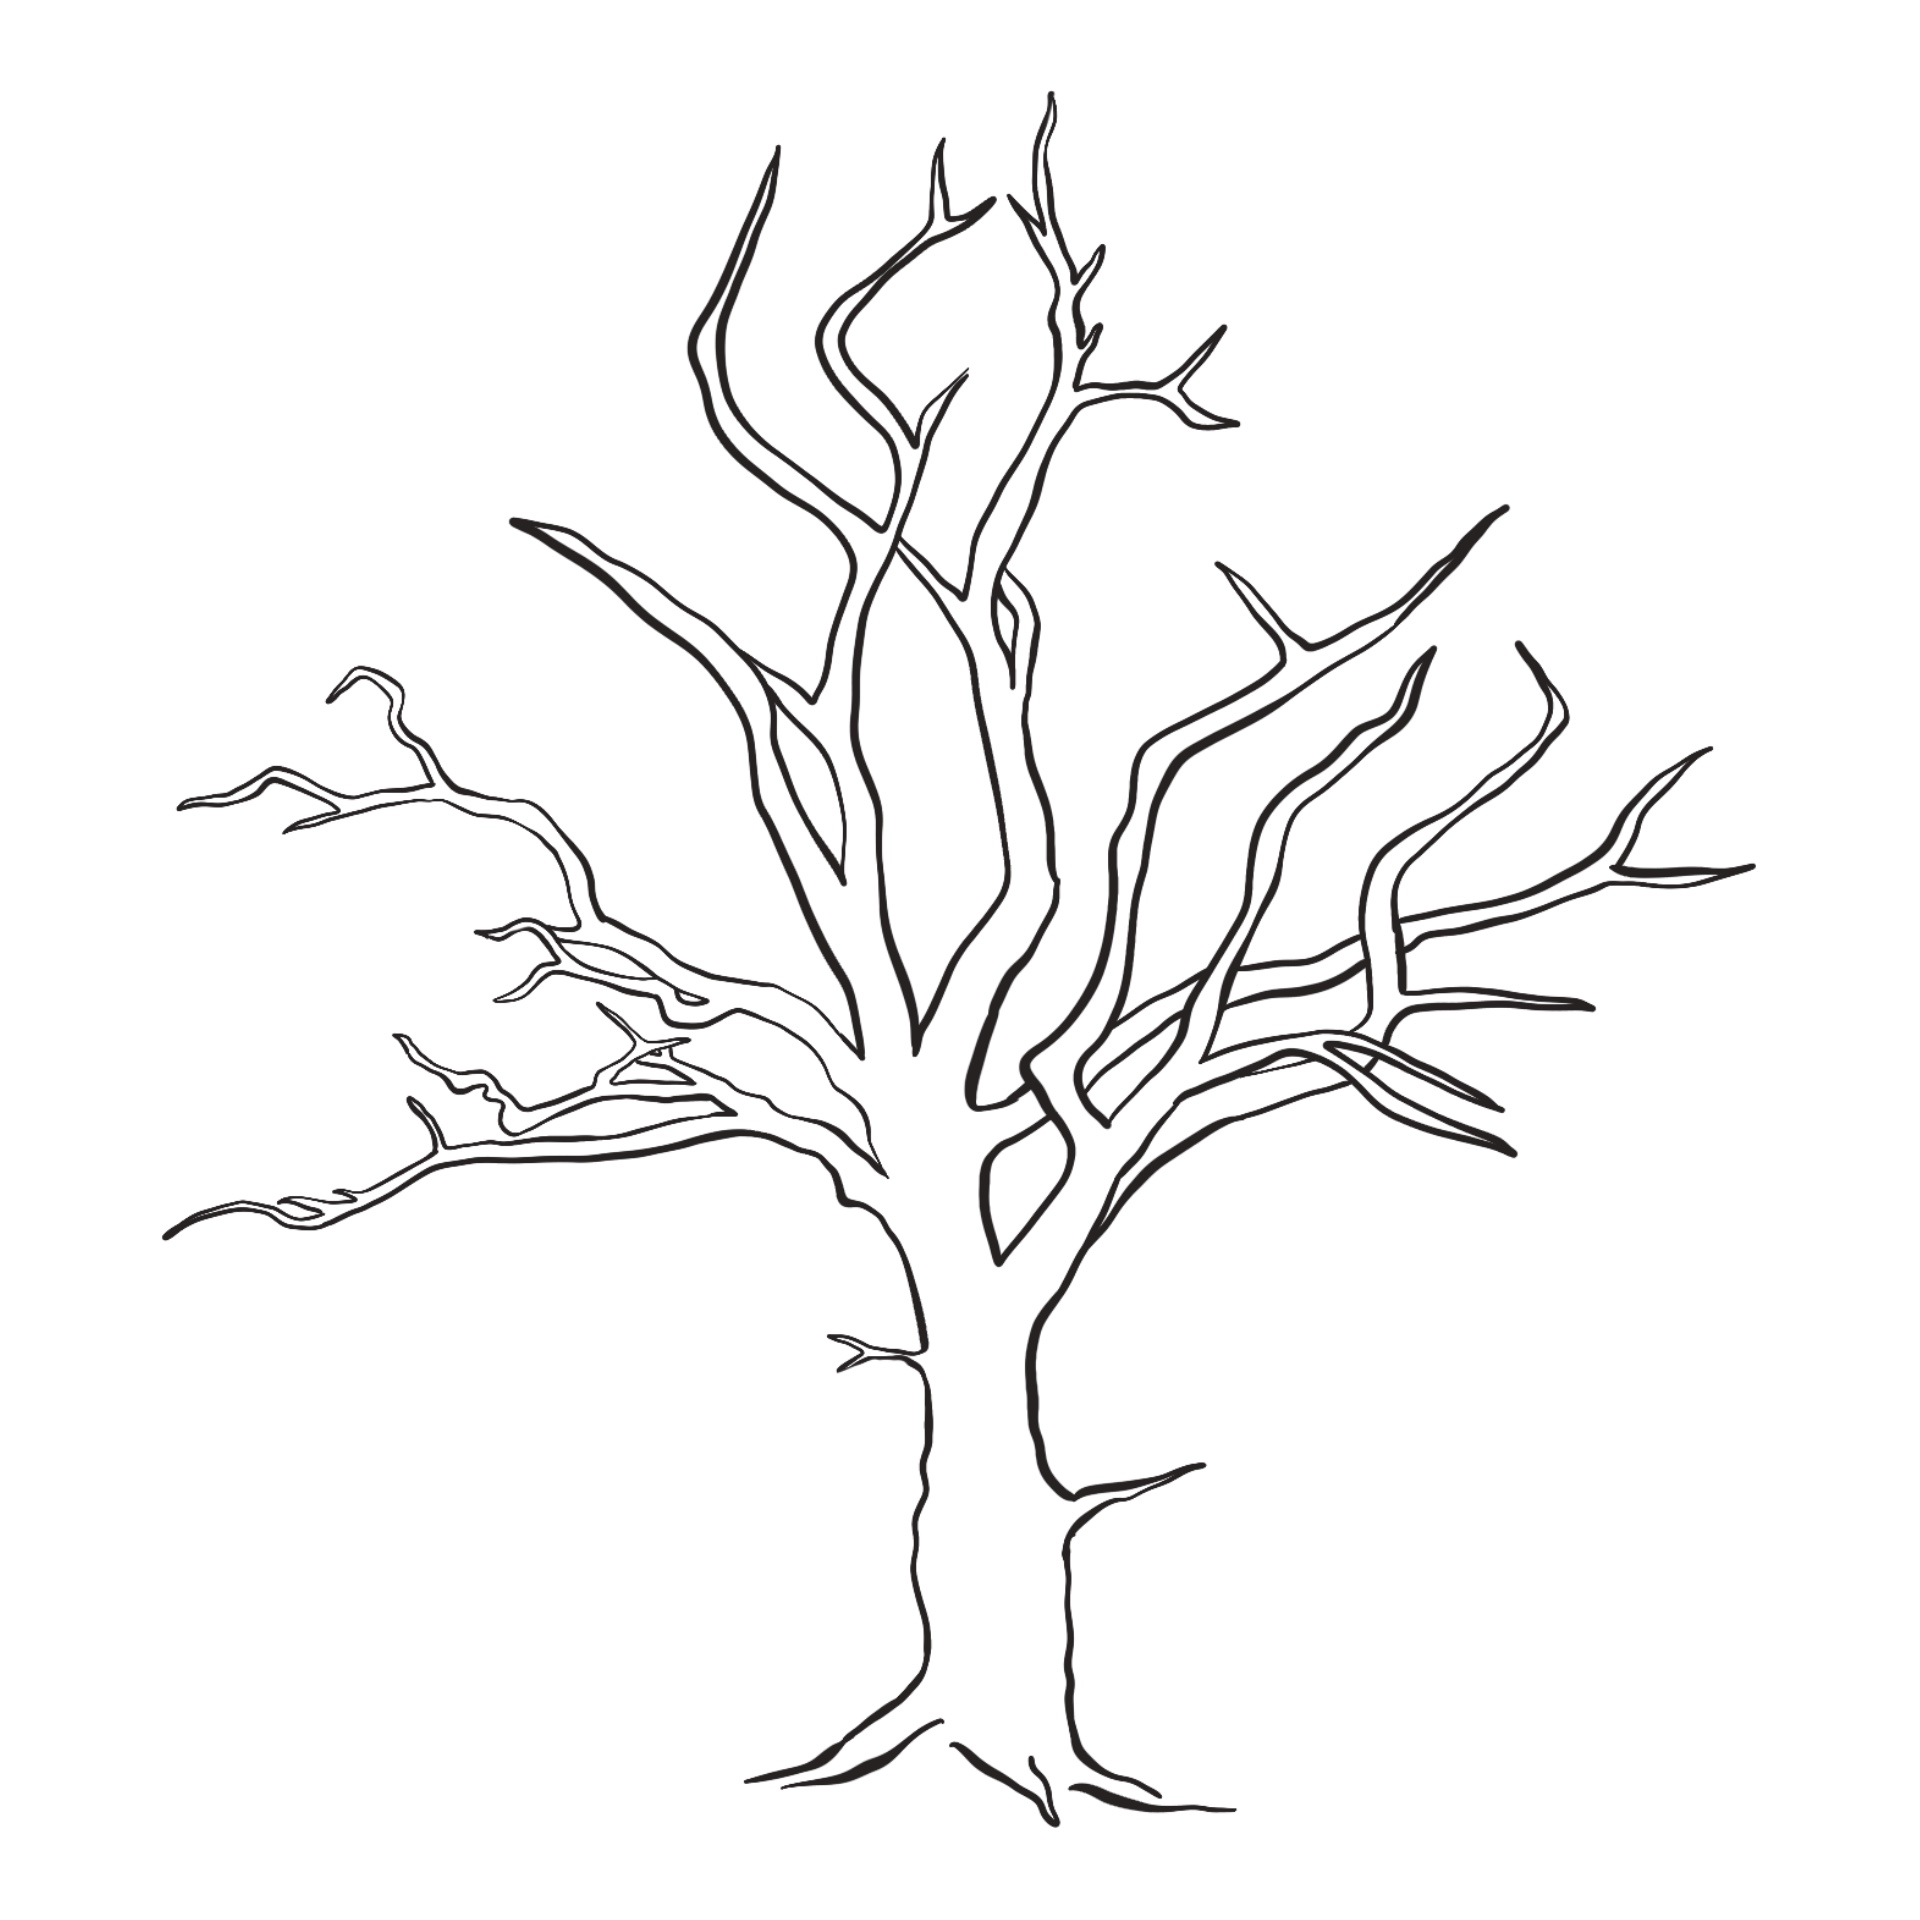 Trees without Leaves Coloring Pages